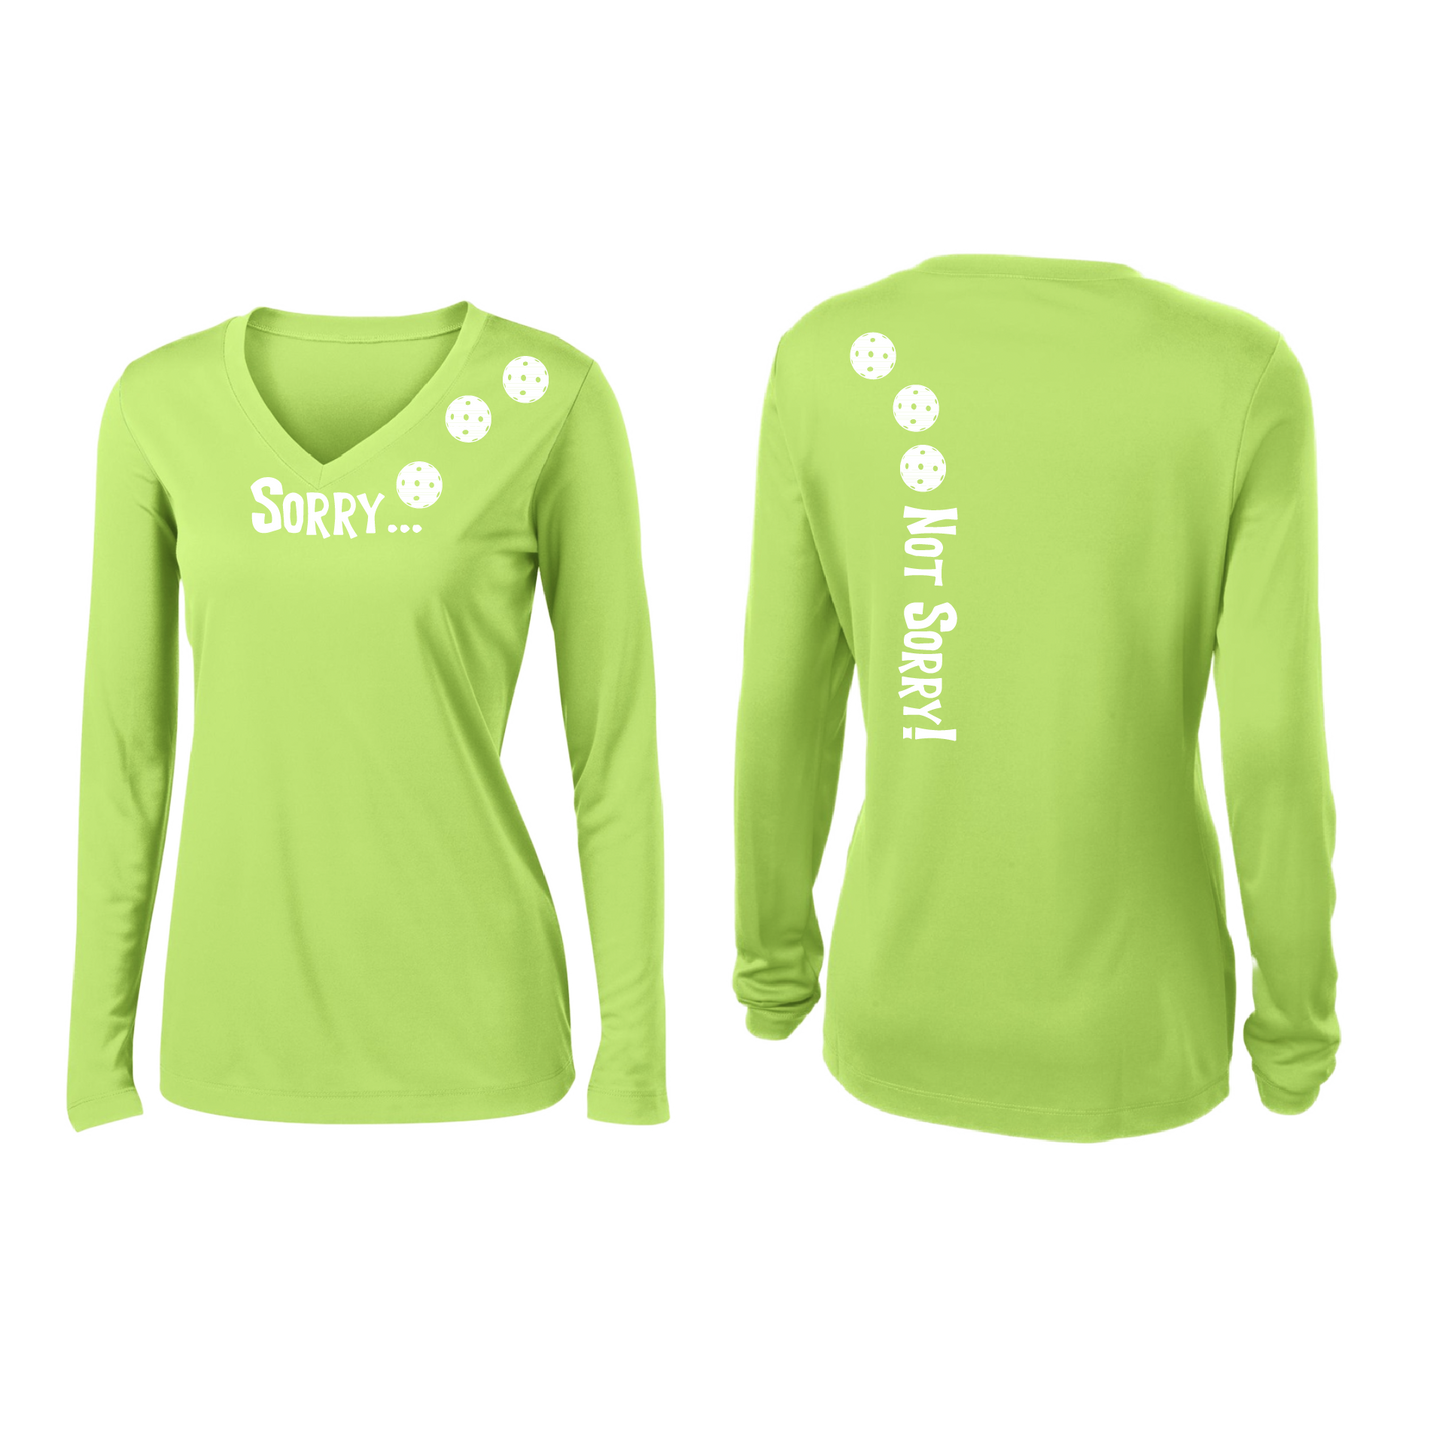 Pickleball Design: Sorry...Not Sorry with Customizable Ball Color – White, Yellow or Pink Balls Women's Styles: Long-Sleeve V-Neck Turn up the volume in this Women's shirt with its perfect mix of softness and attitude. Material is ultra-comfortable with moisture wicking properties and tri-blend softness. PosiCharge technology locks in color. Highly breathable and lightweight.